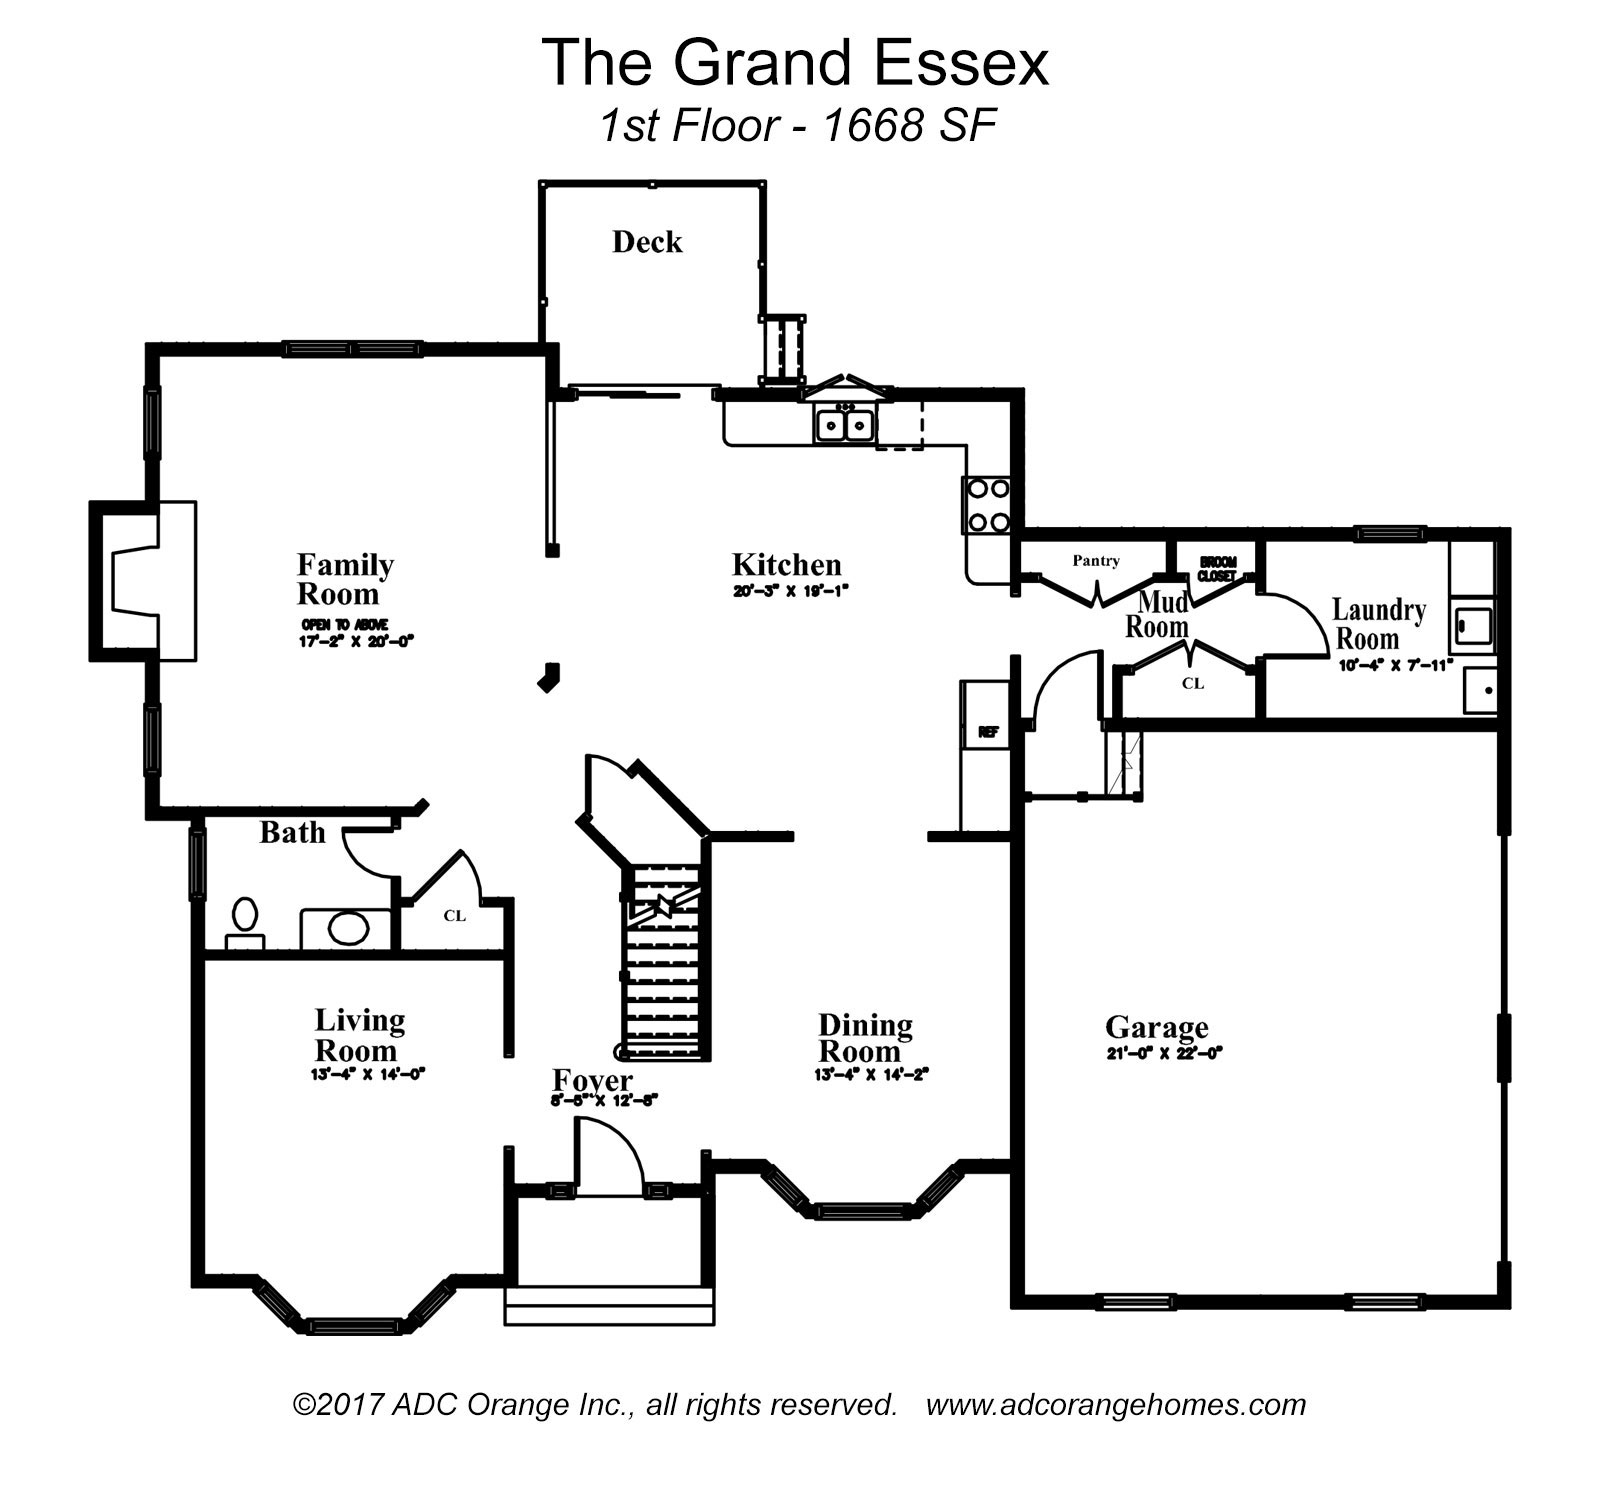 1st Floor Plan for Grand Essex - New Home in Orange County, New York